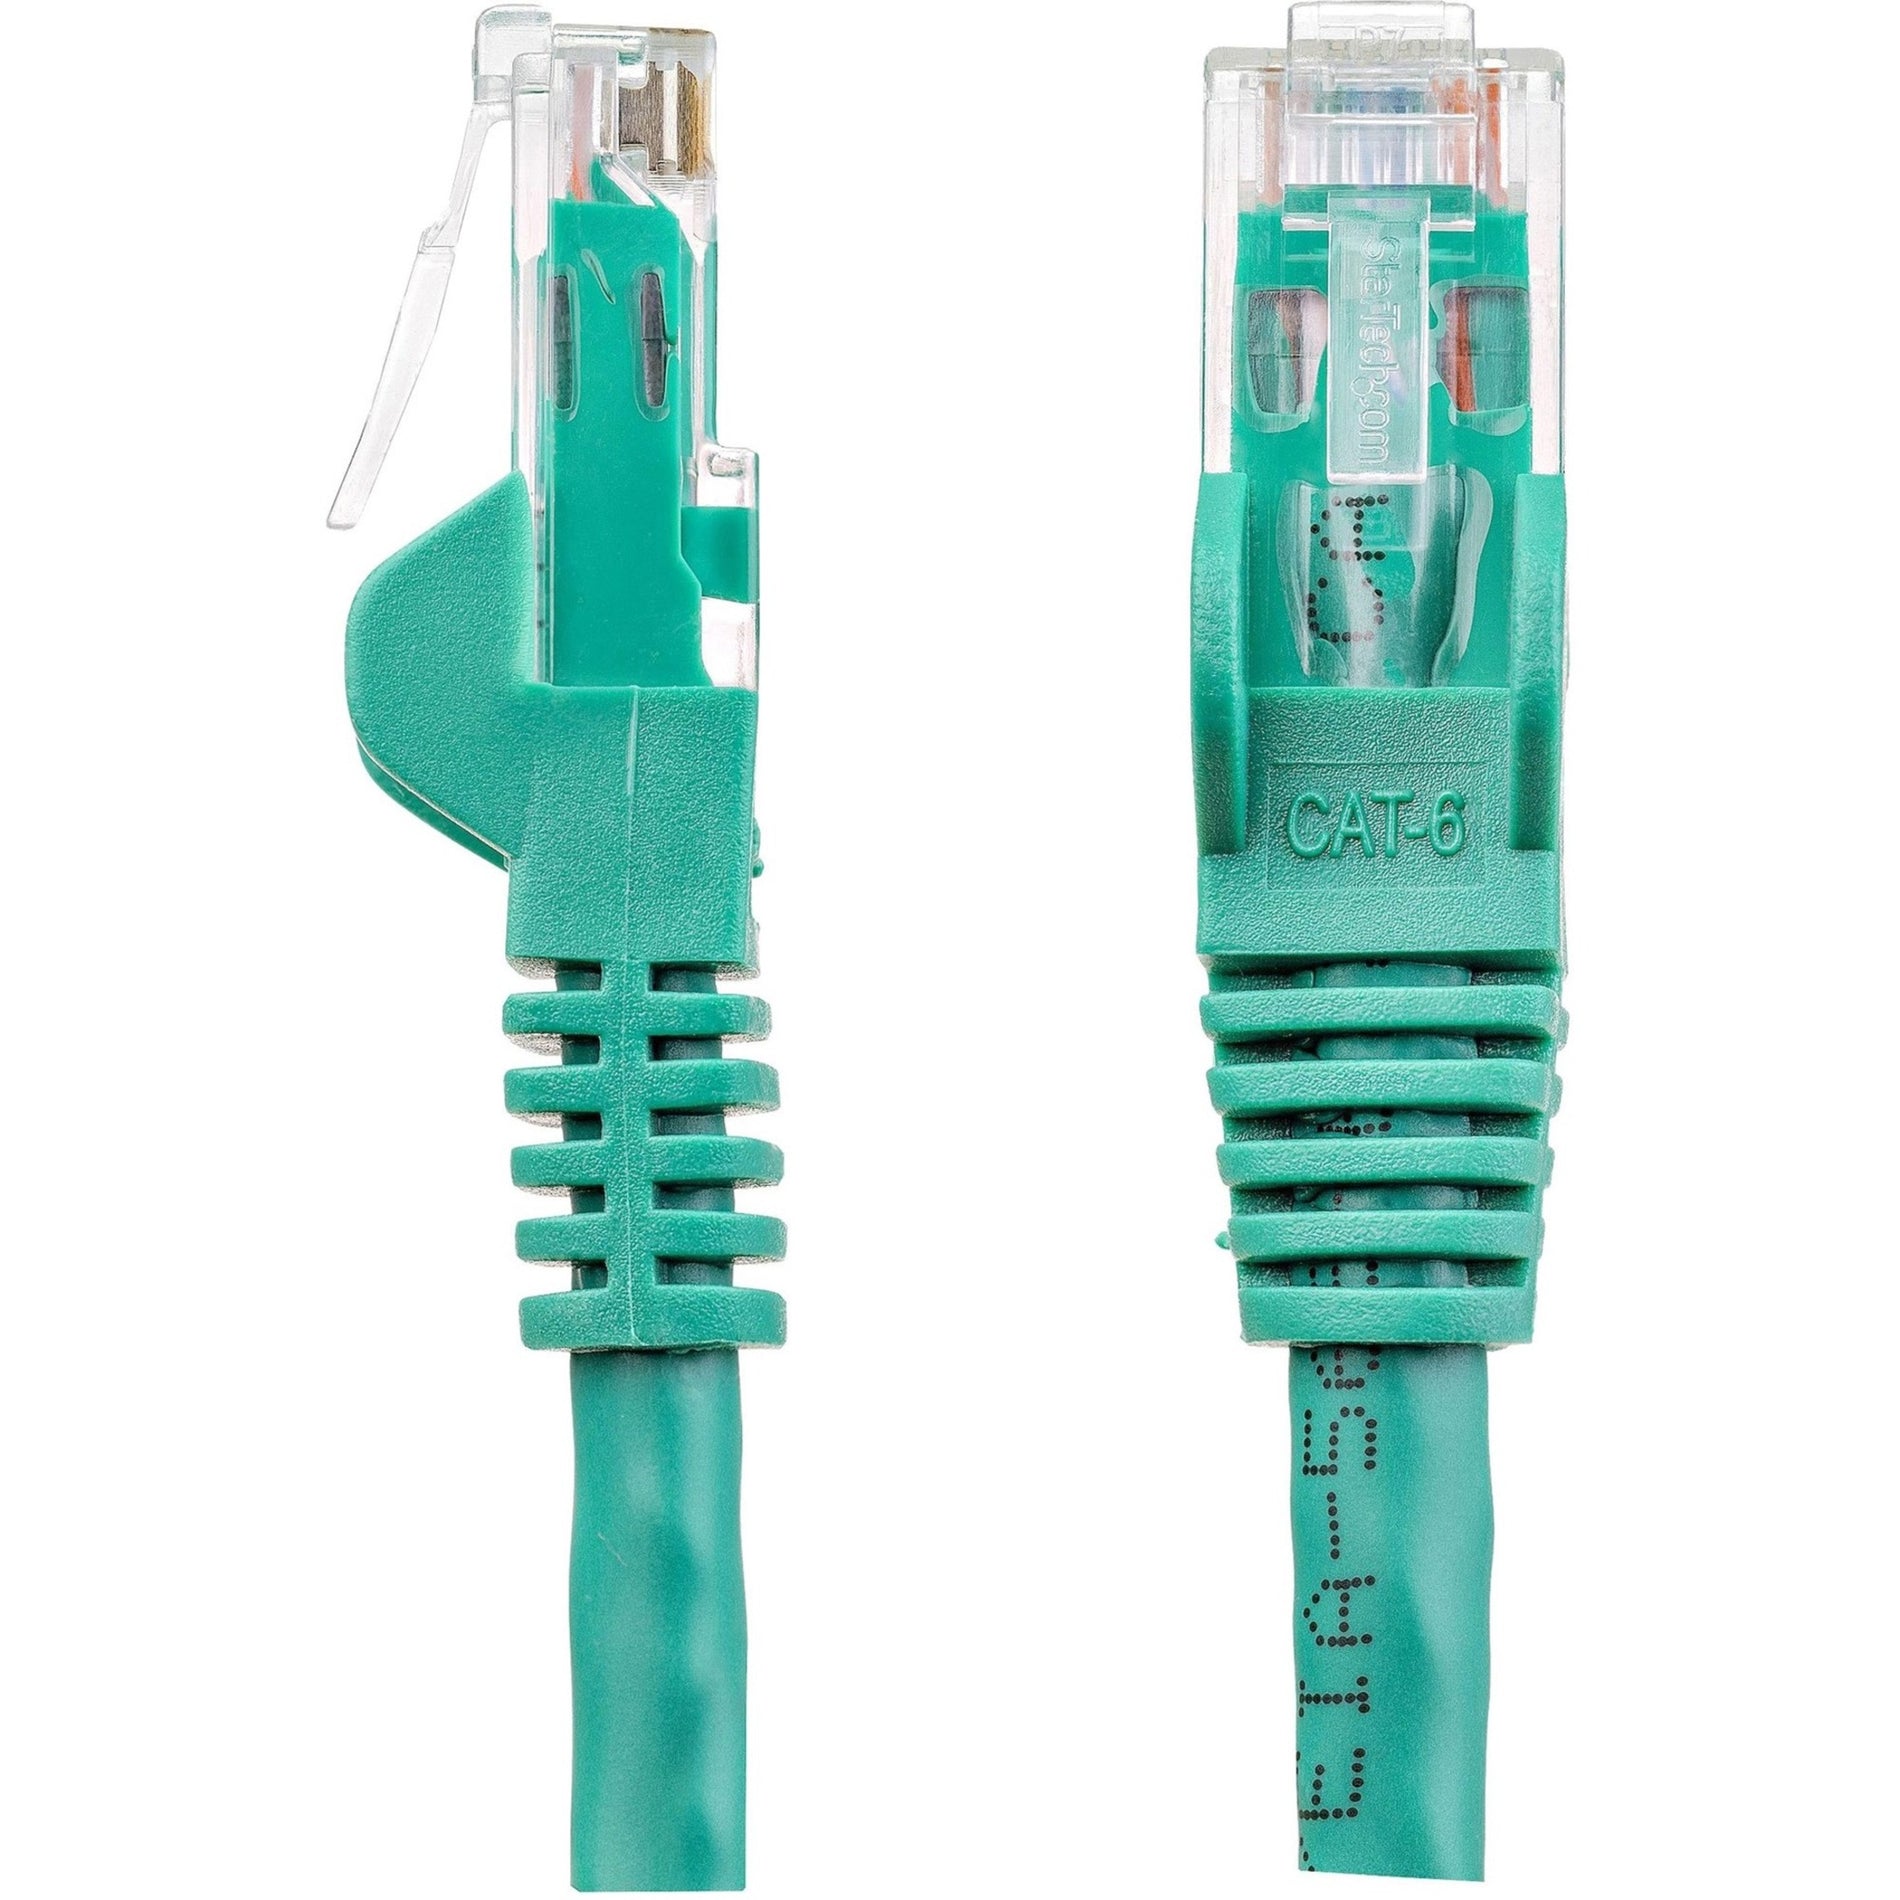 StarTech.com N6PATCH10GN 10 ft Green Snagless Cat6 UTP Patch Cable, 10 Gbit/s Data Transfer Rate, Lifetime Warranty